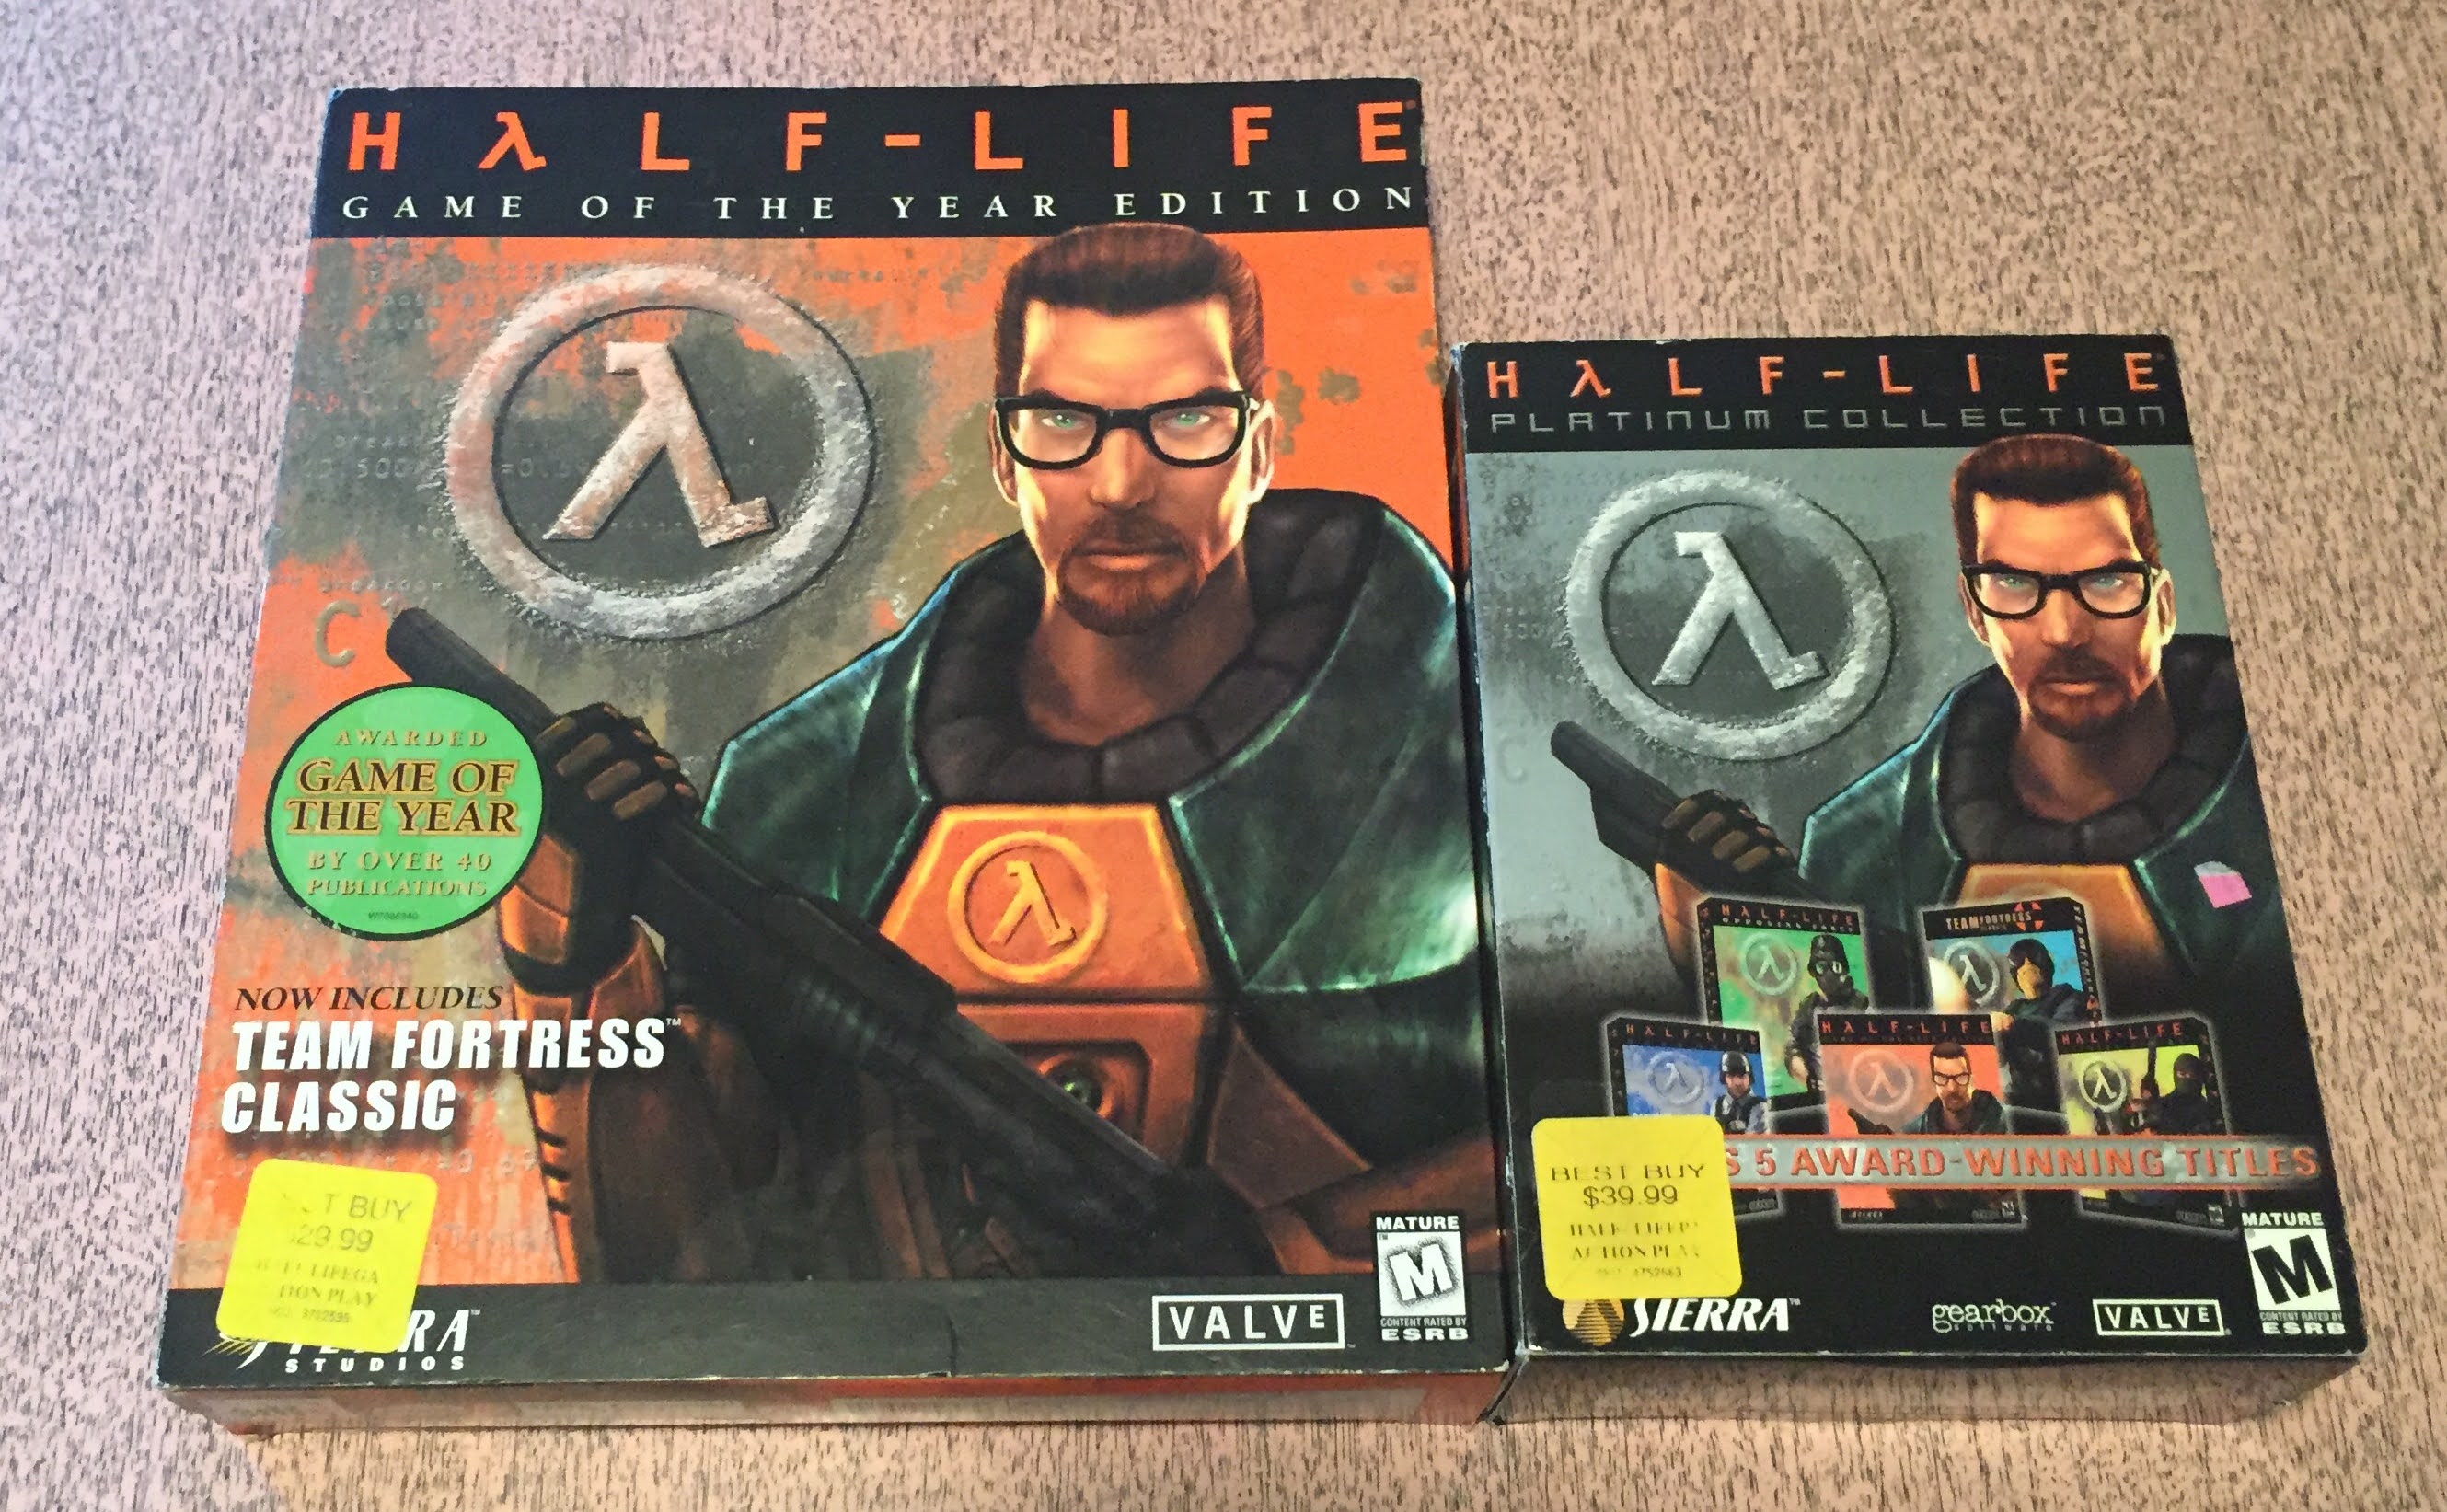 what is half life rated